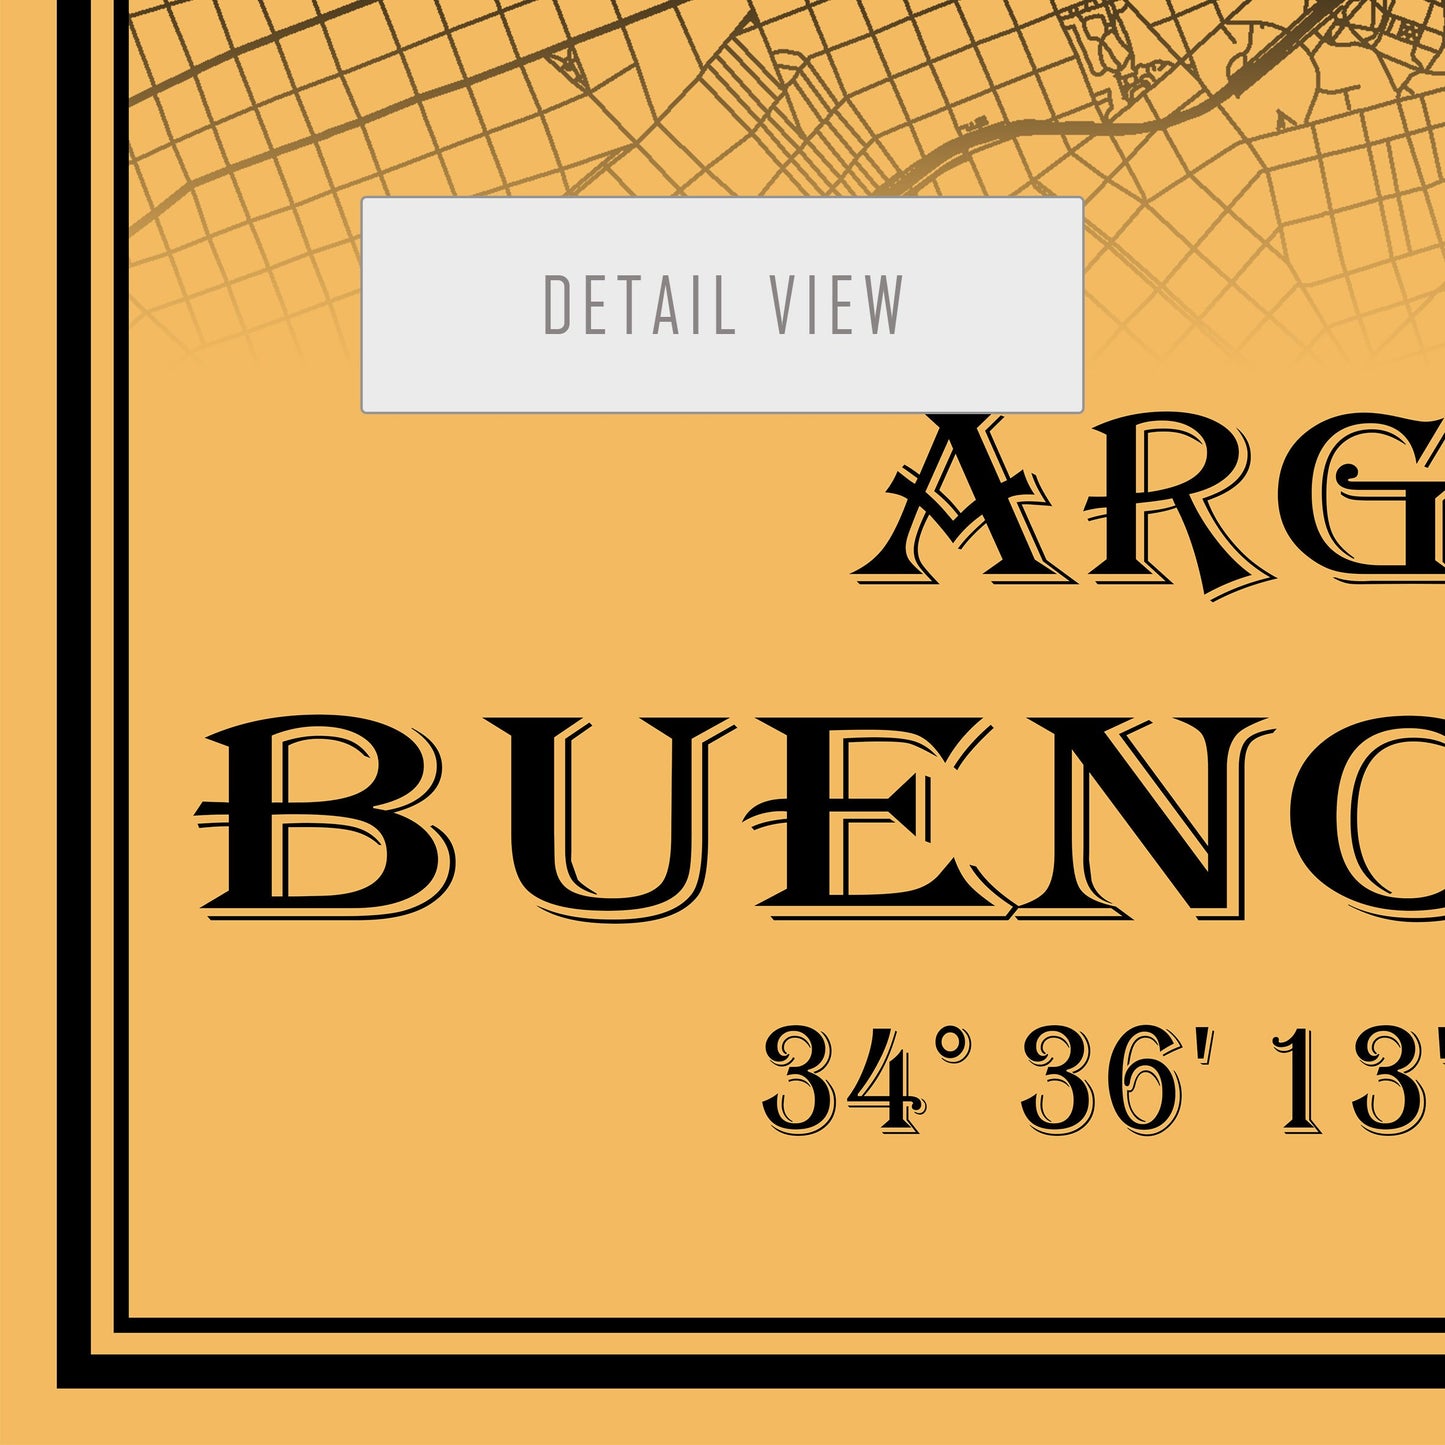 City map of BUENOS AIRES - Home Decor - Office map - Travel map - Print map - Medallion yellow map - Buenos Aires map - Map art - Argentina